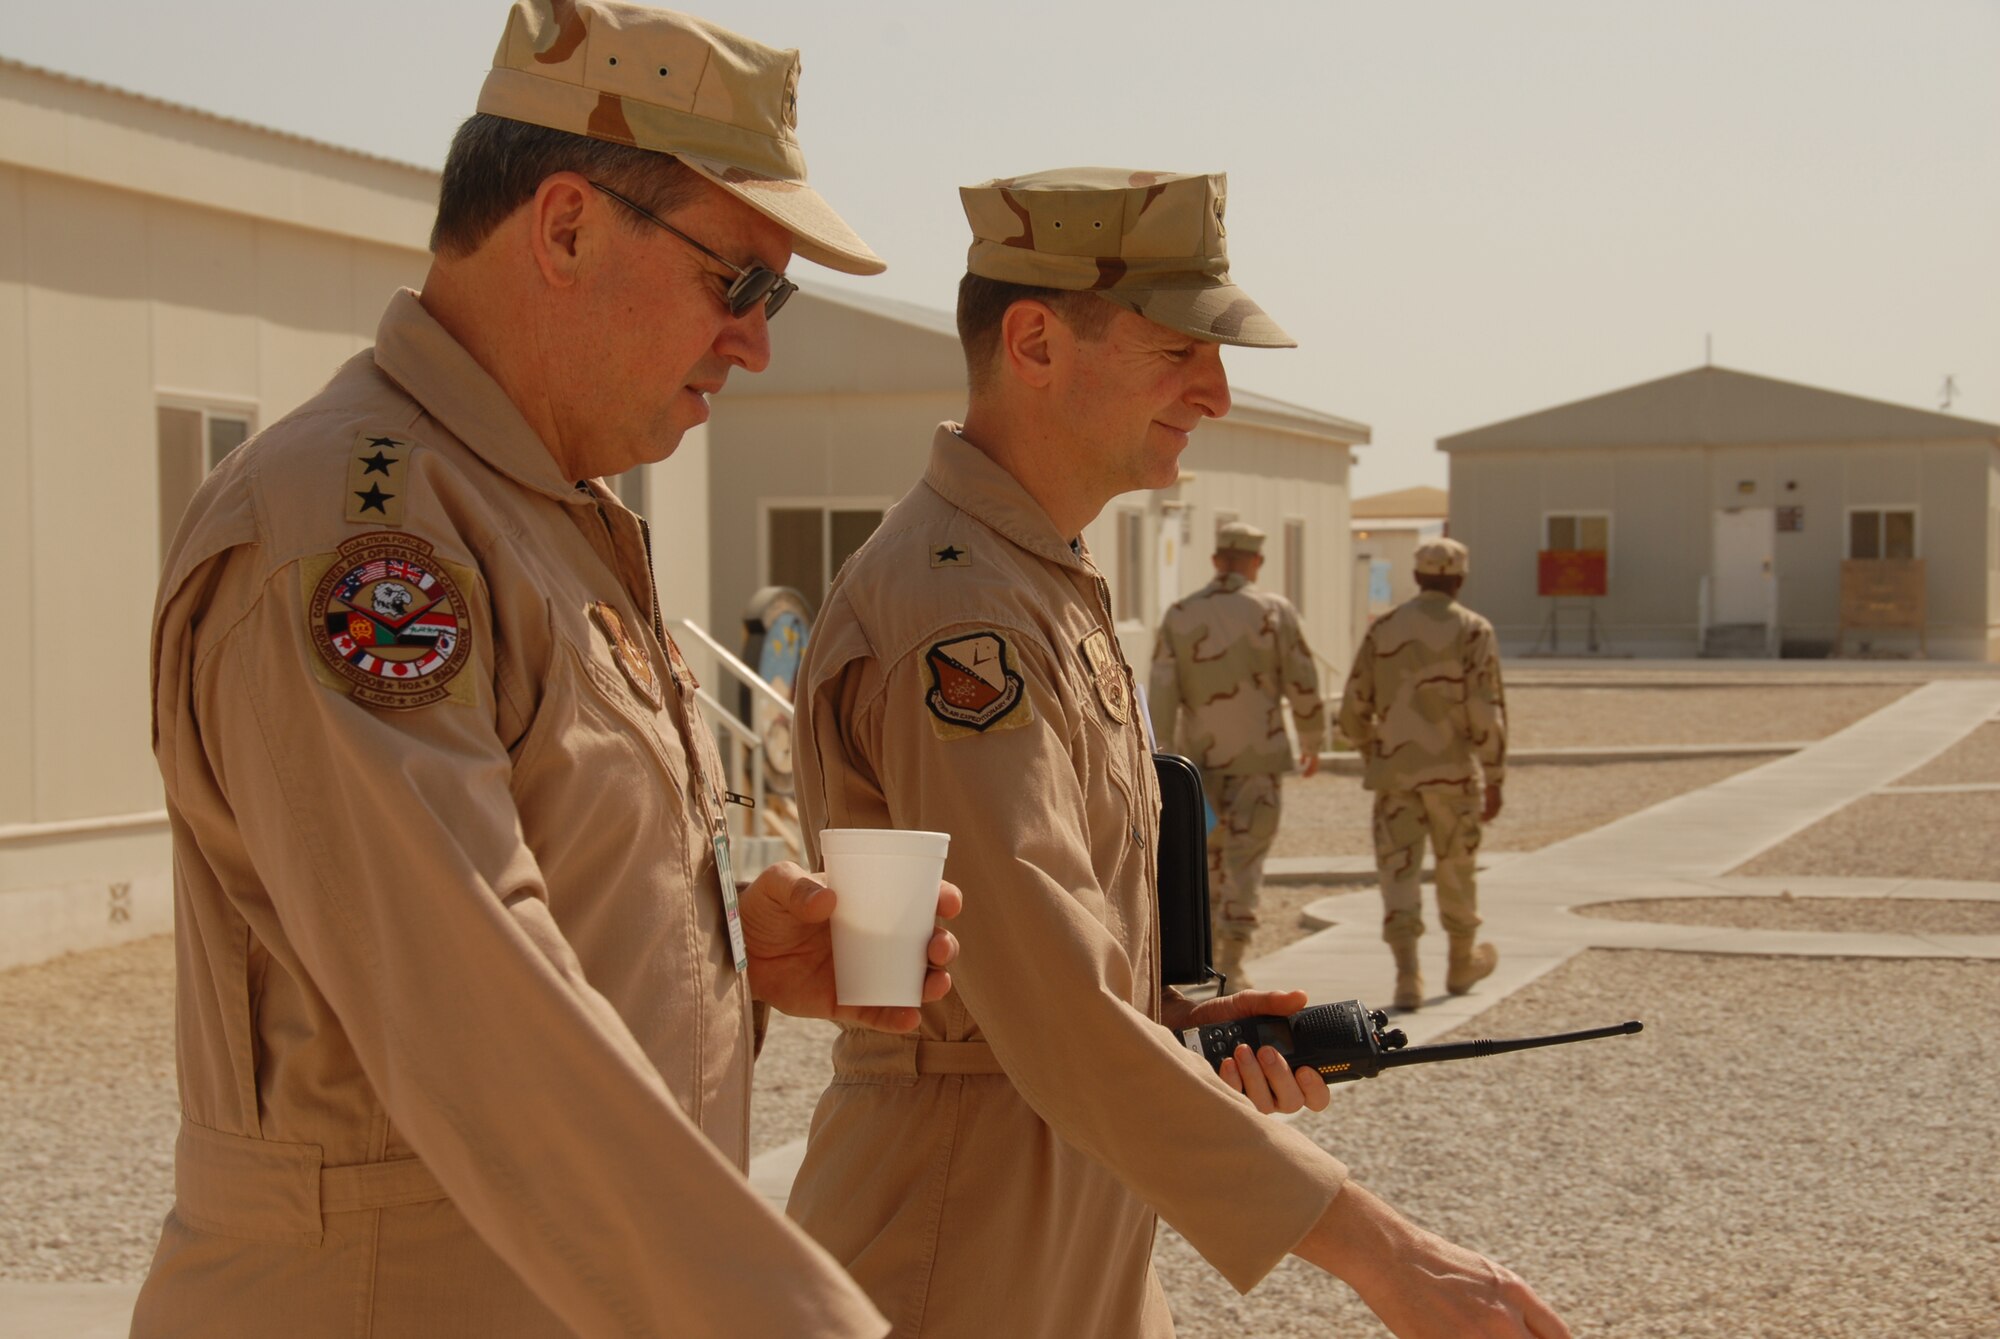 Lt. Gen. David Deptula (left), deputy chief of staff for intelligence, surveillance and reconnaissance, met with Brig. Gen. Charles Shugg (right), 379th Air Expeditionary Wing commander, during his visit here. The general discussed how a combined arms campaign with integrated airpower is the only way to build success in both theaters.